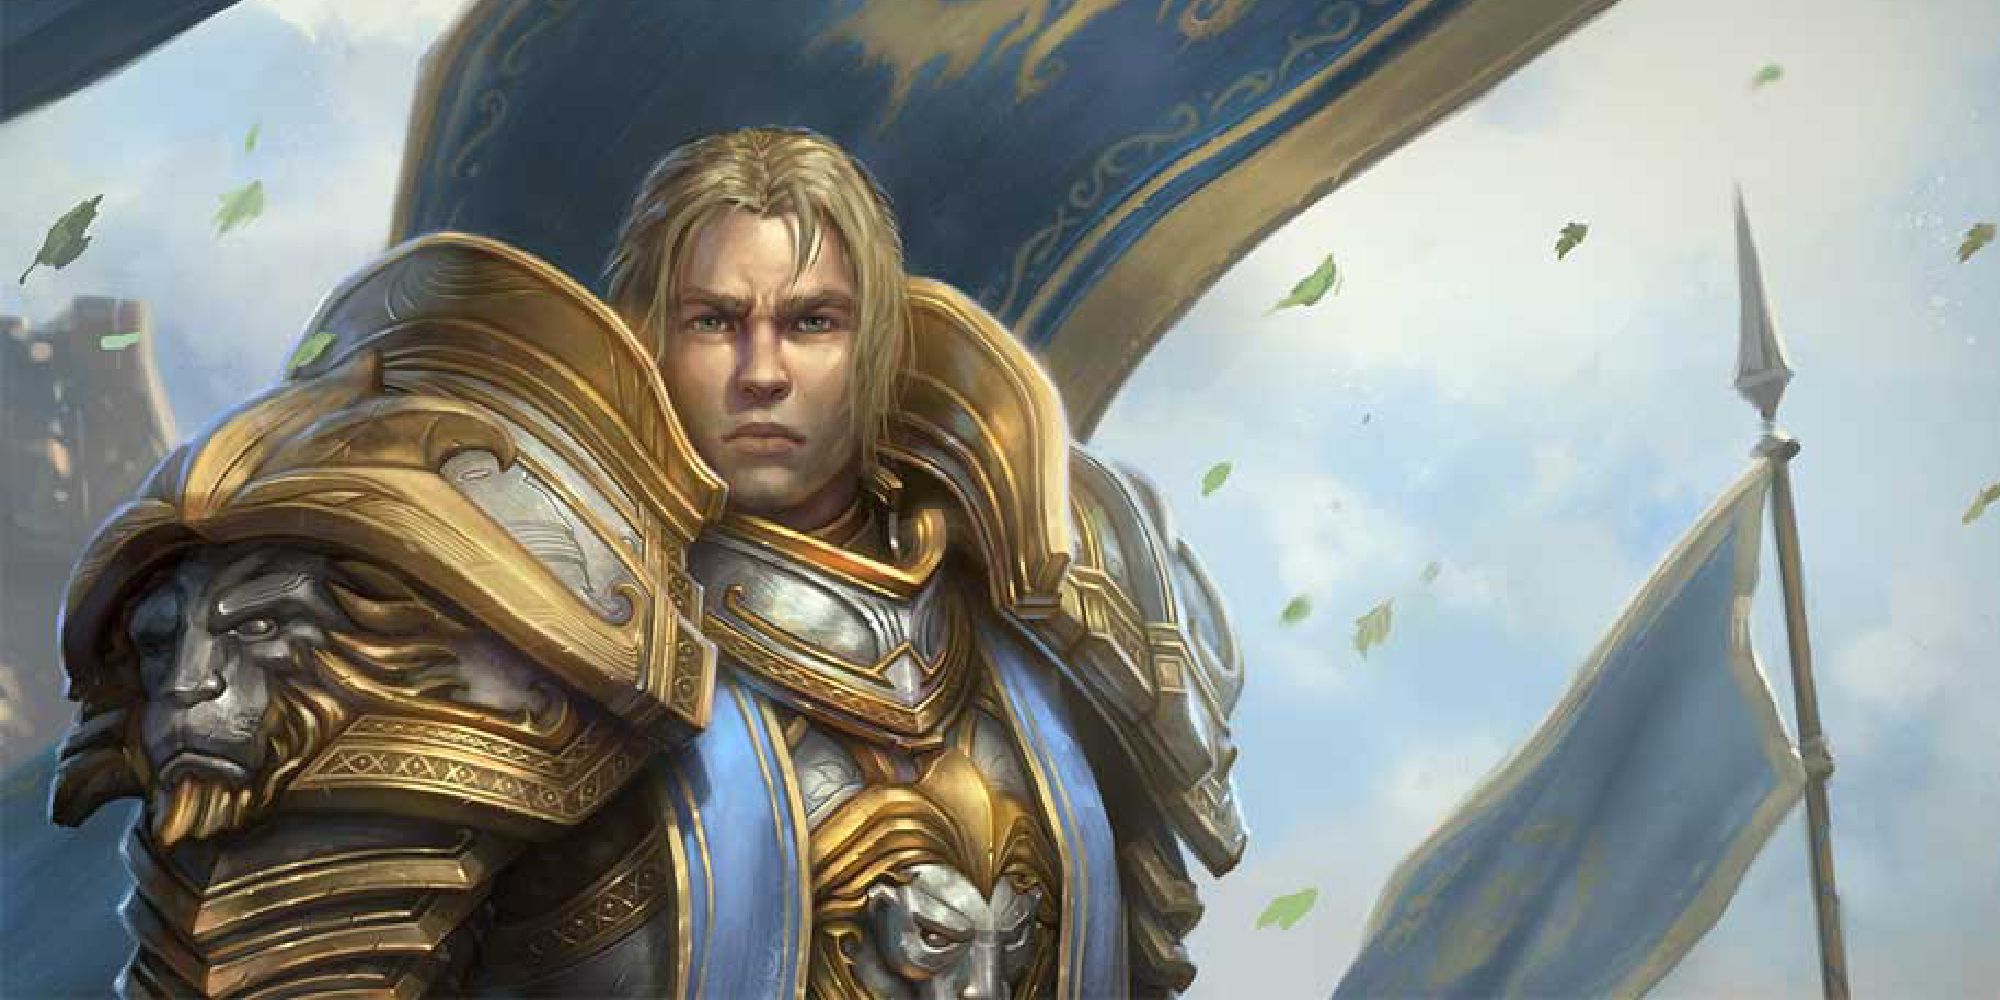 WoW's Anduin Wrynn poses during a battle